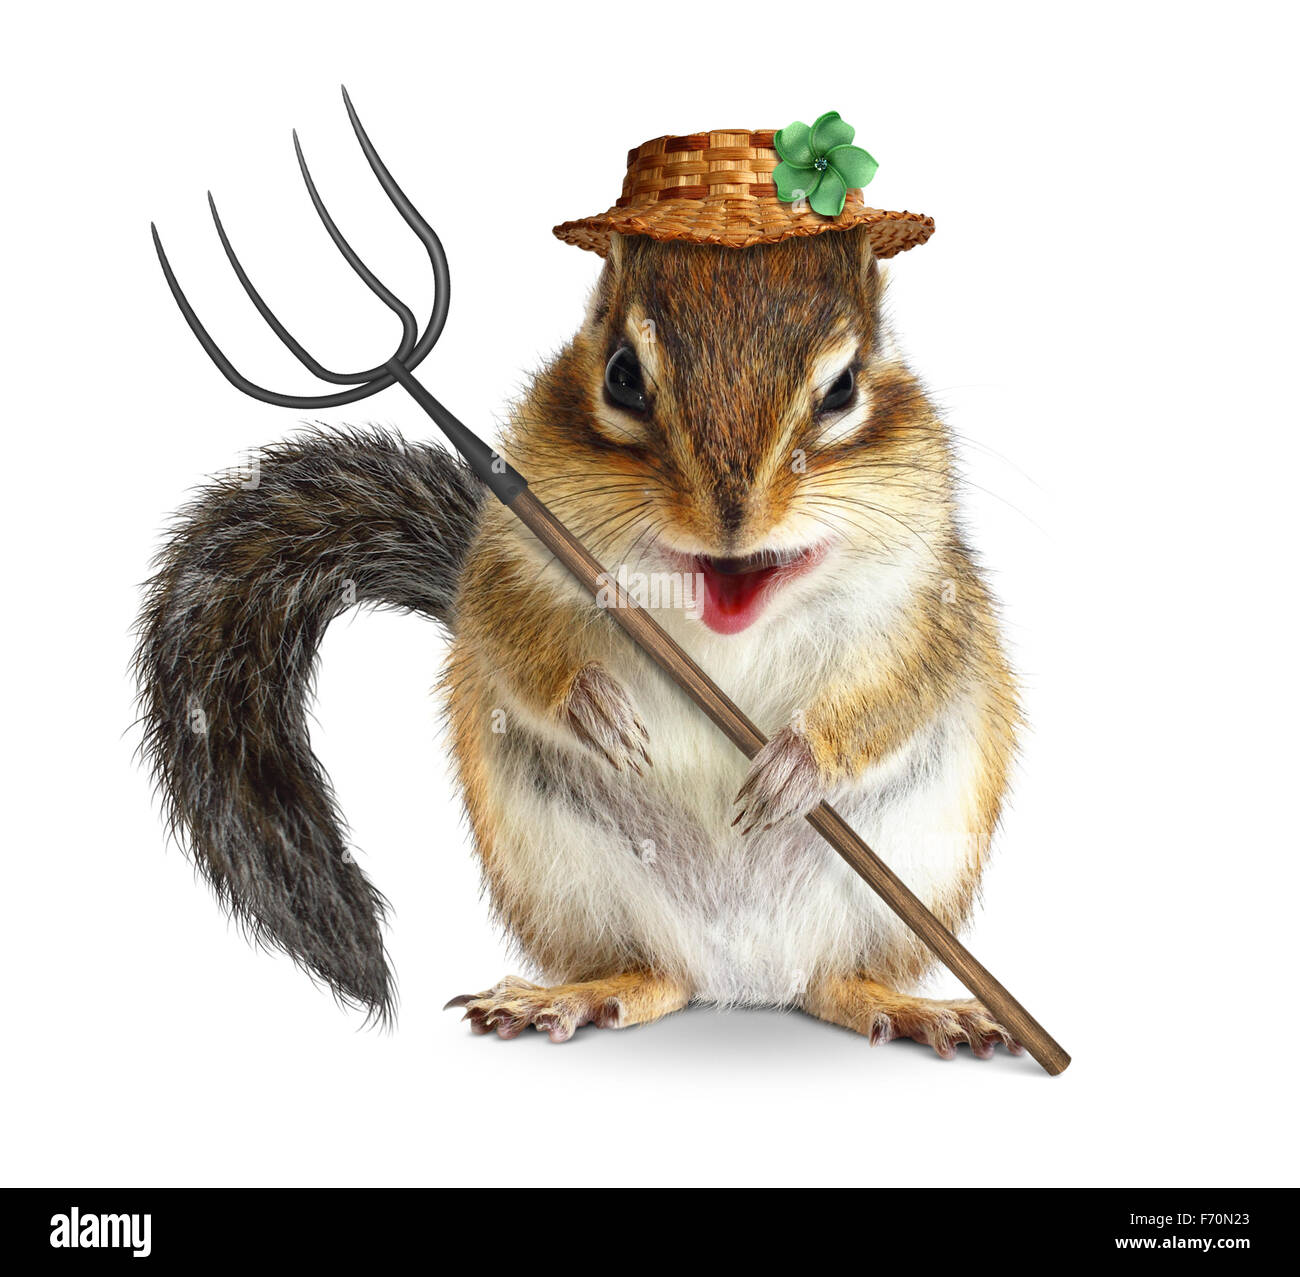 Funny animal farmer, squirrel with hay fork, isolated on white Stock Photo